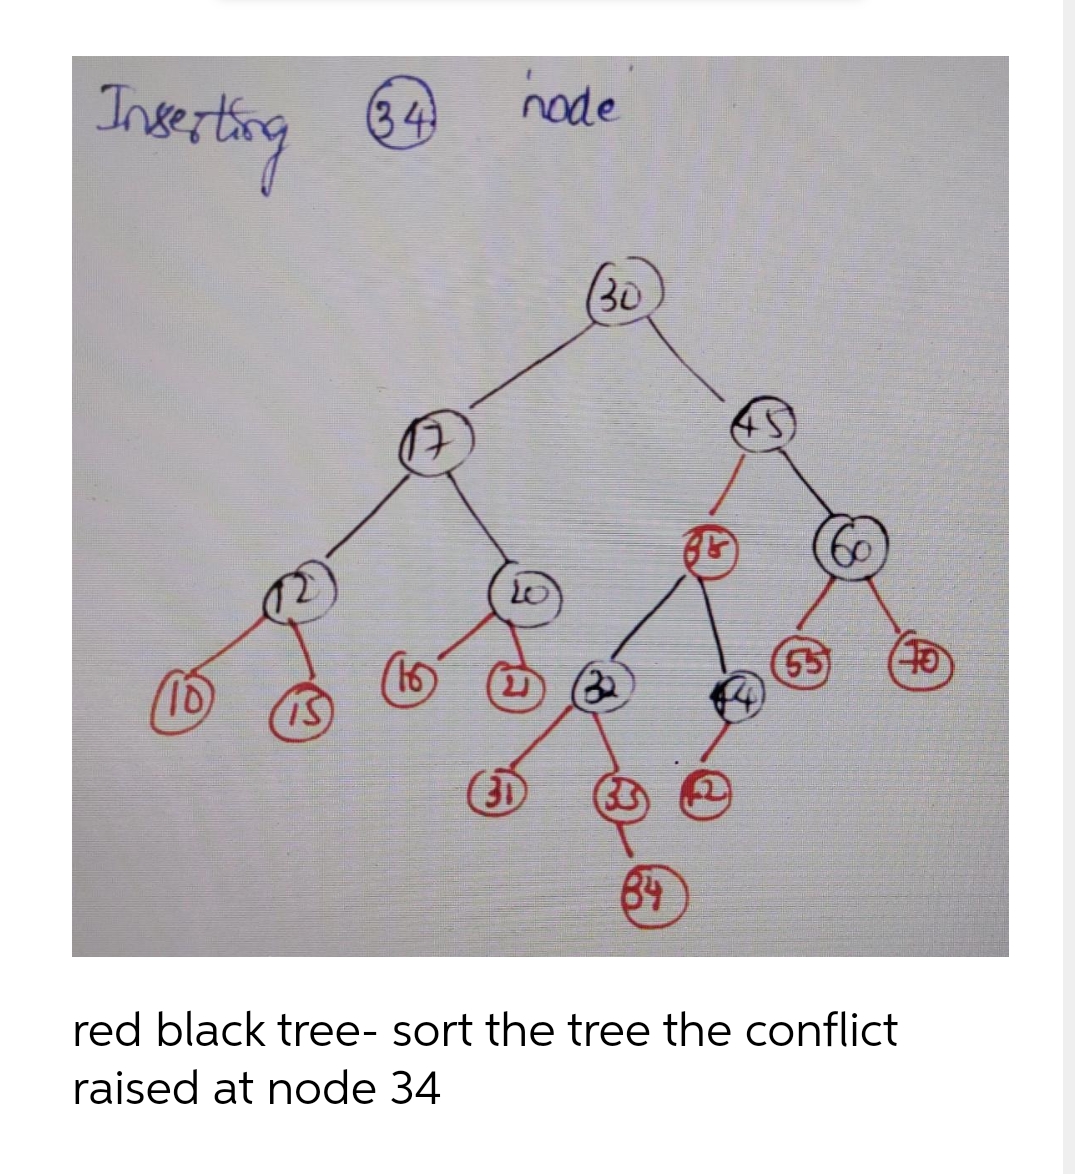 Thosting
34
node
30
55
3D
34
red black tree- sort the tree the conflict
raised at node 34
